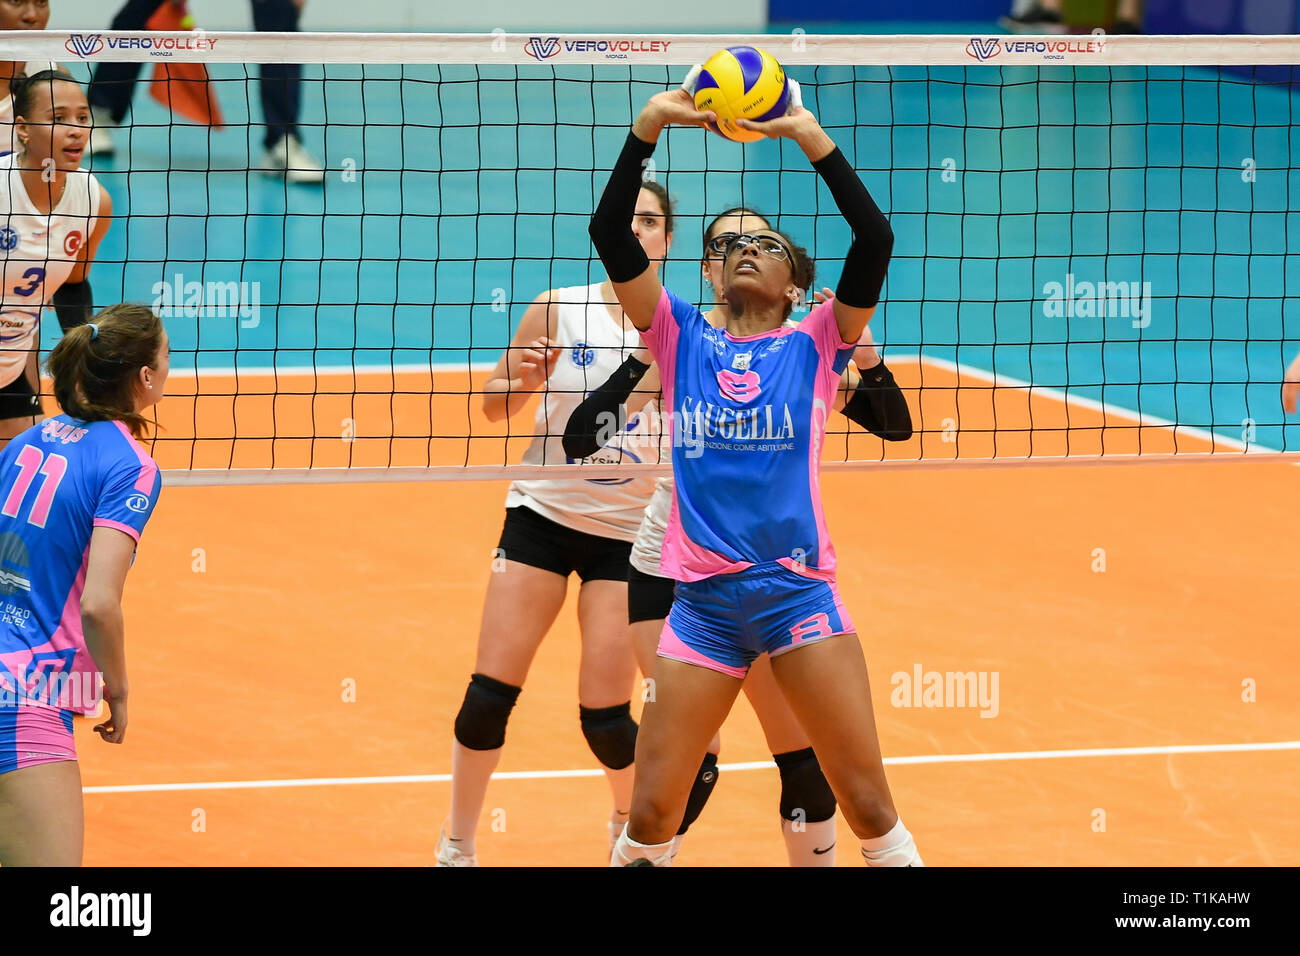 Candy Arena, Monza, Italy. 27th March, 2019. CEV Volleyball Challenge Cup  women, Final, 2nd leg. Rachael Adams of Saugella Monza during the match  between Saugella Monza and Aydin BBSK at the Candy